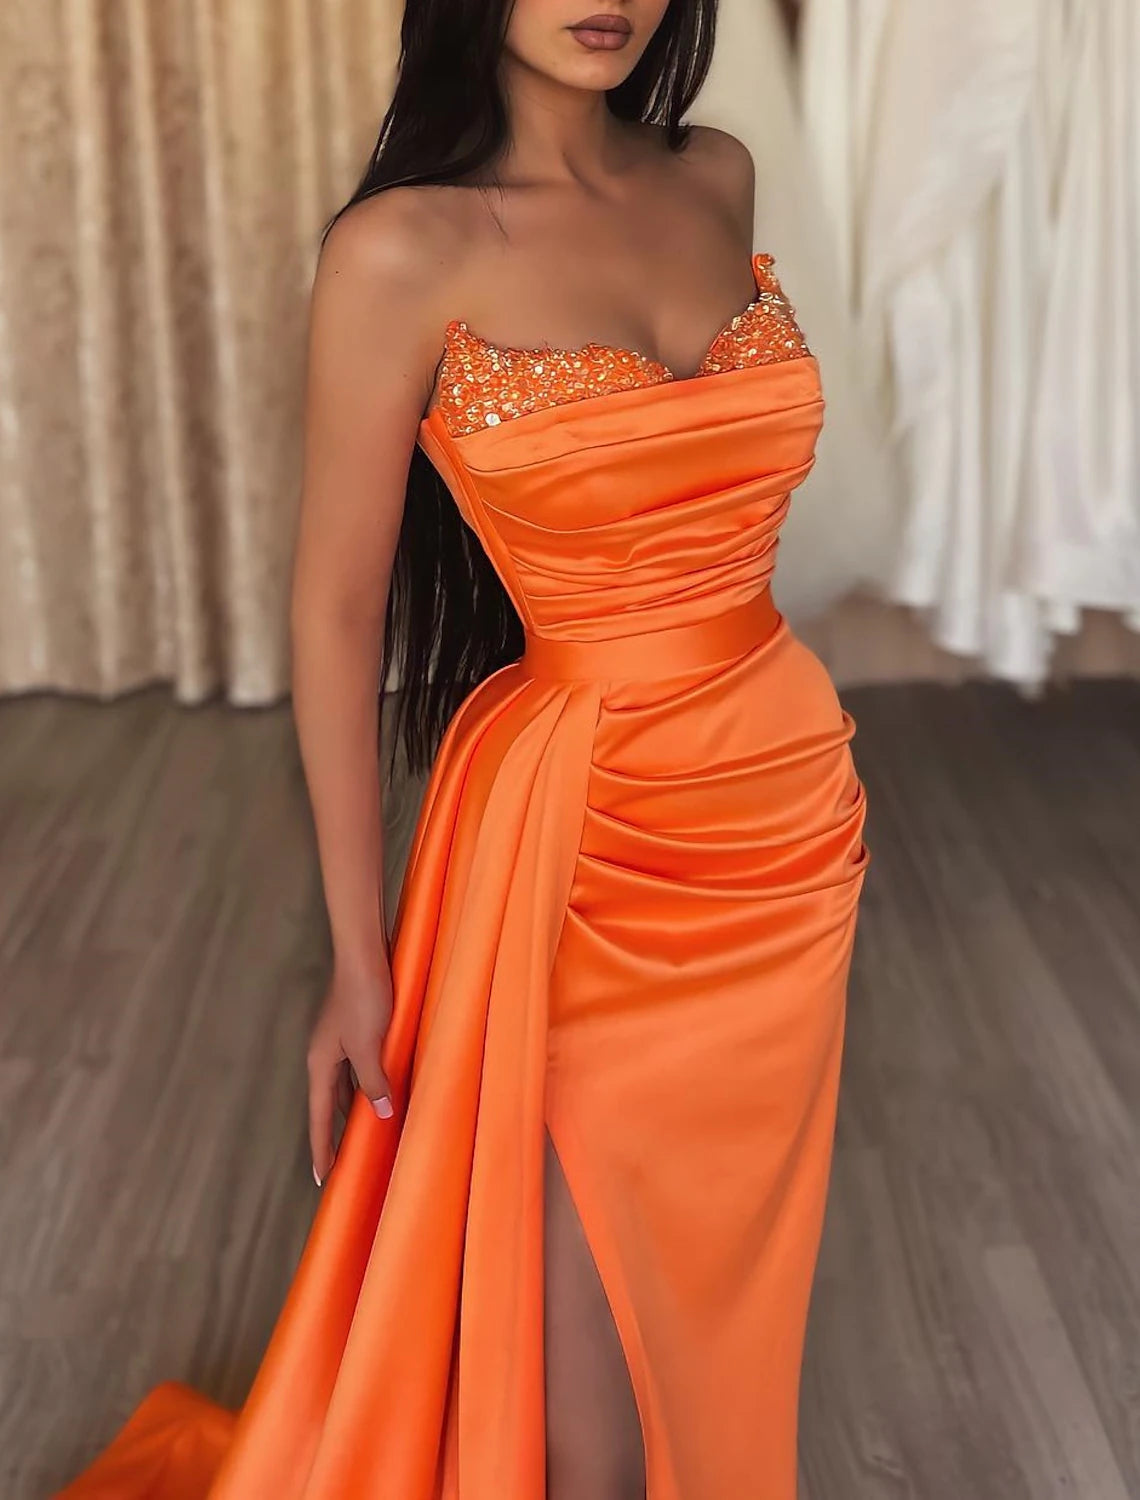 Mermaid Ruched Evening Gown Satin Dress Cocktail Party Prom Court Train Sleeveless Strapless Bridesmaid Dress with Beading Sequin